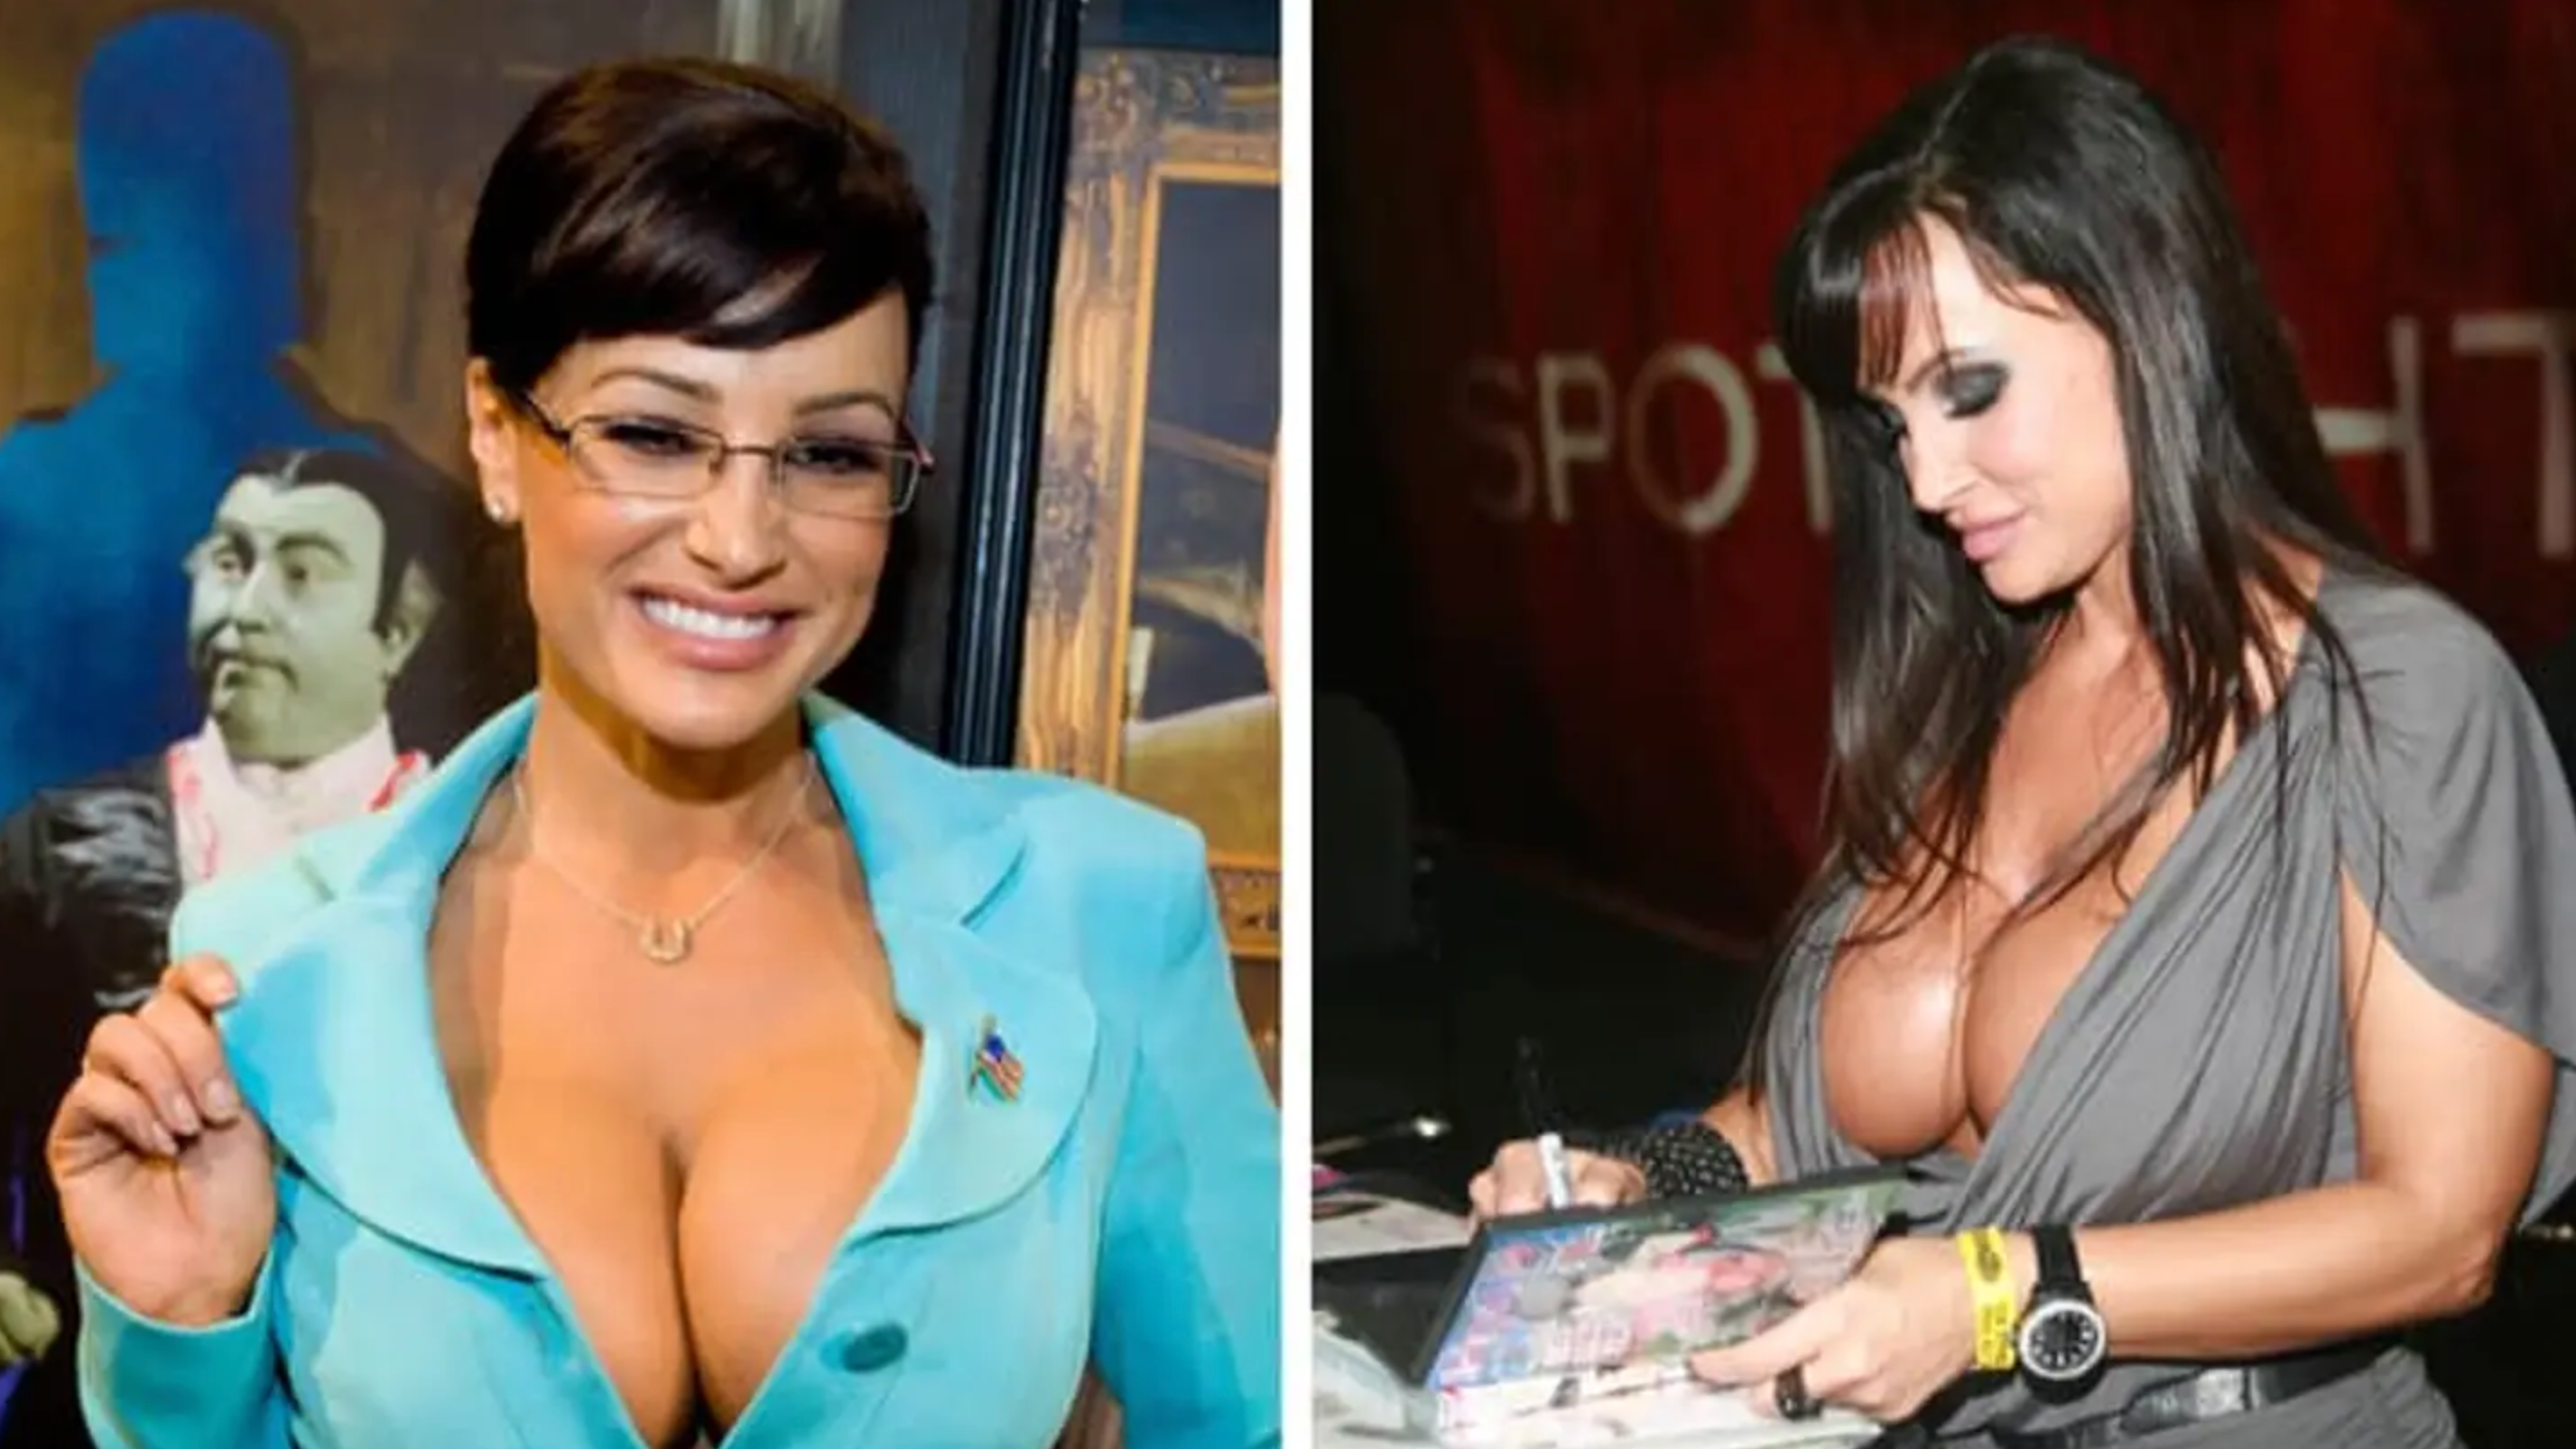 Lisa Ann reveals which athletes are the best in the bedroom picture